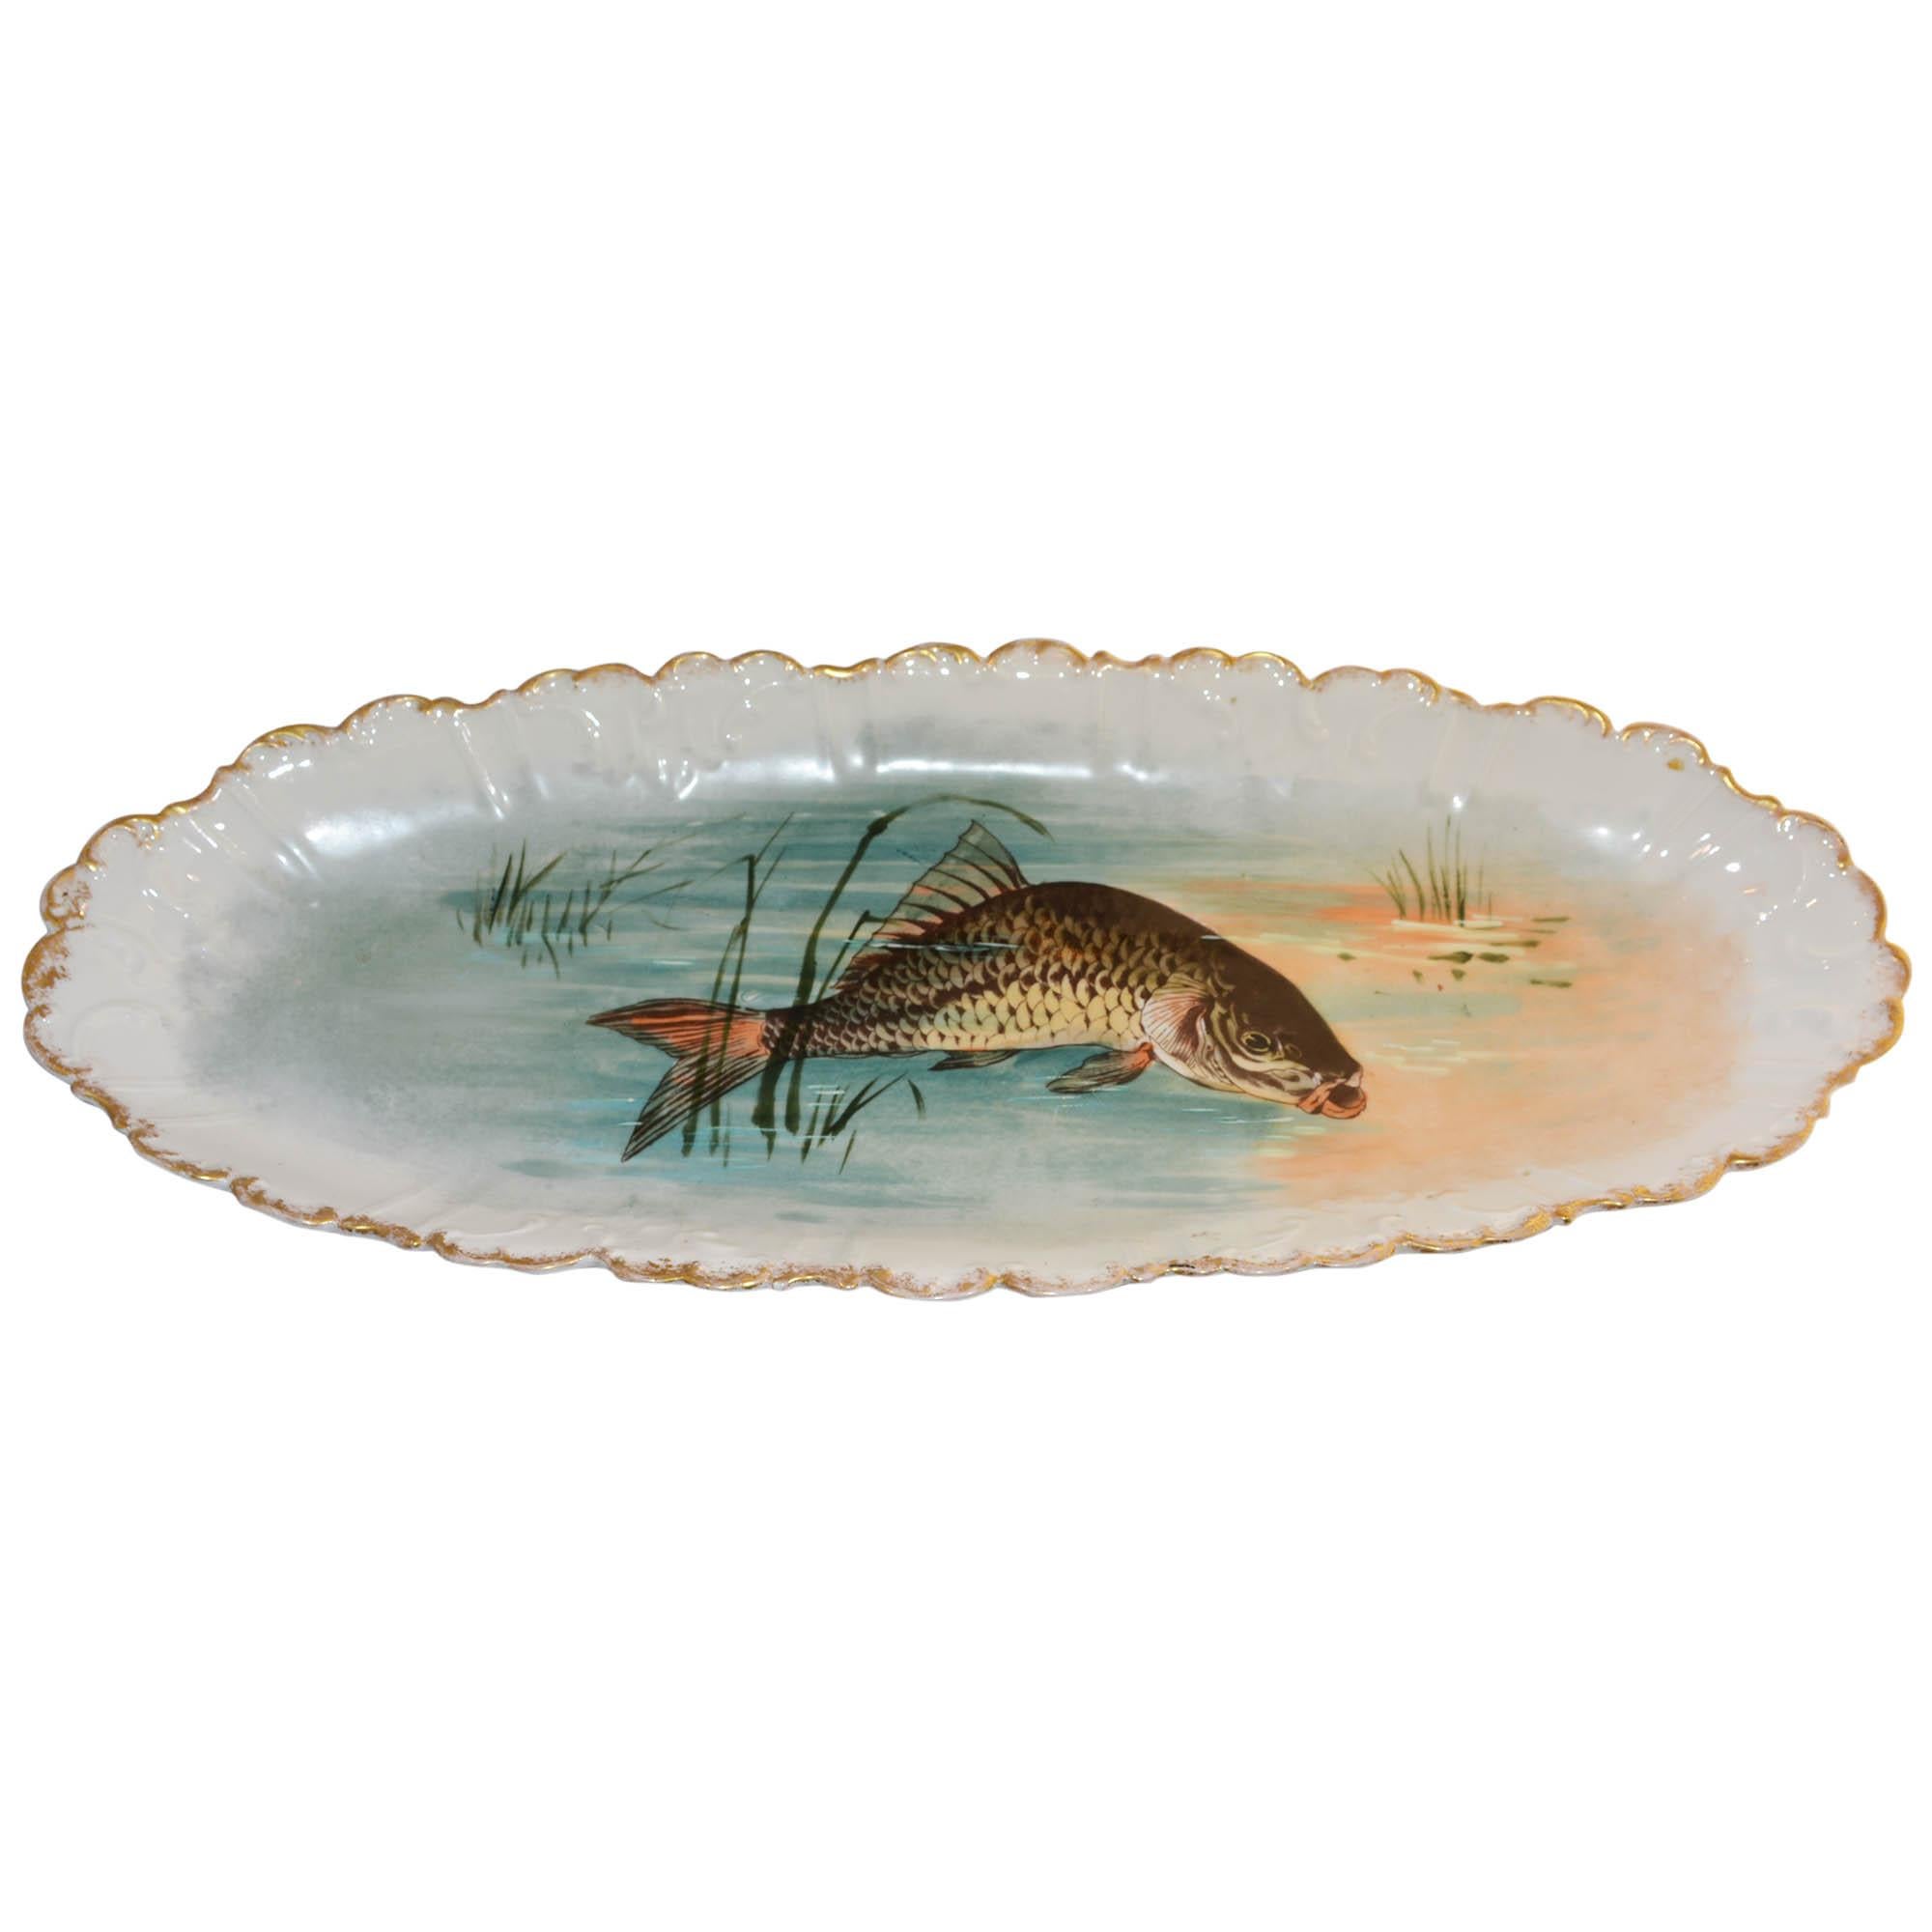 Hand-Painted Limoges Fish Design Plates with Large Platter, Sauce Boat and Underplate